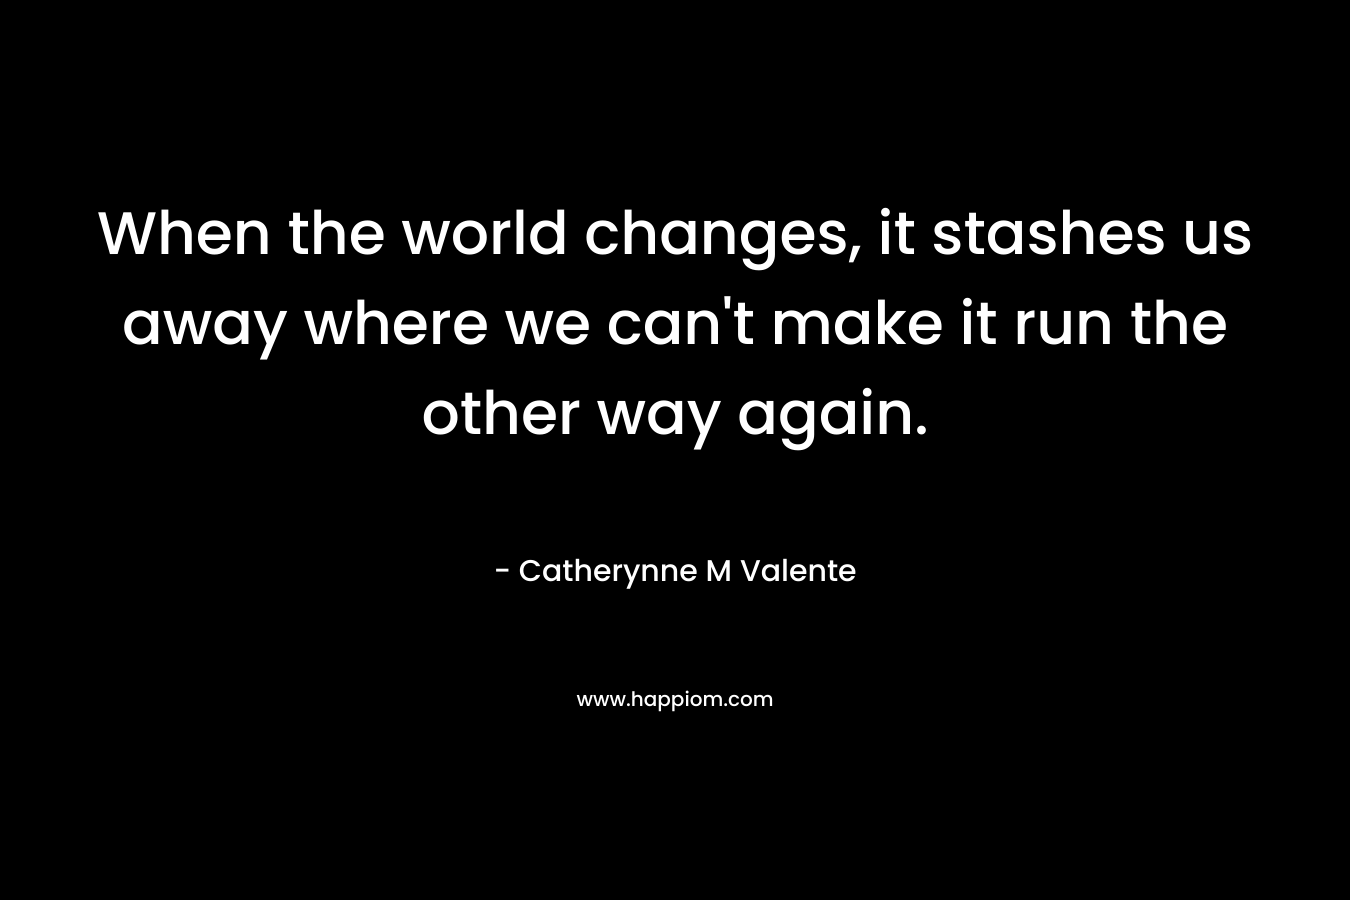 When the world changes, it stashes us away where we can't make it run the other way again.